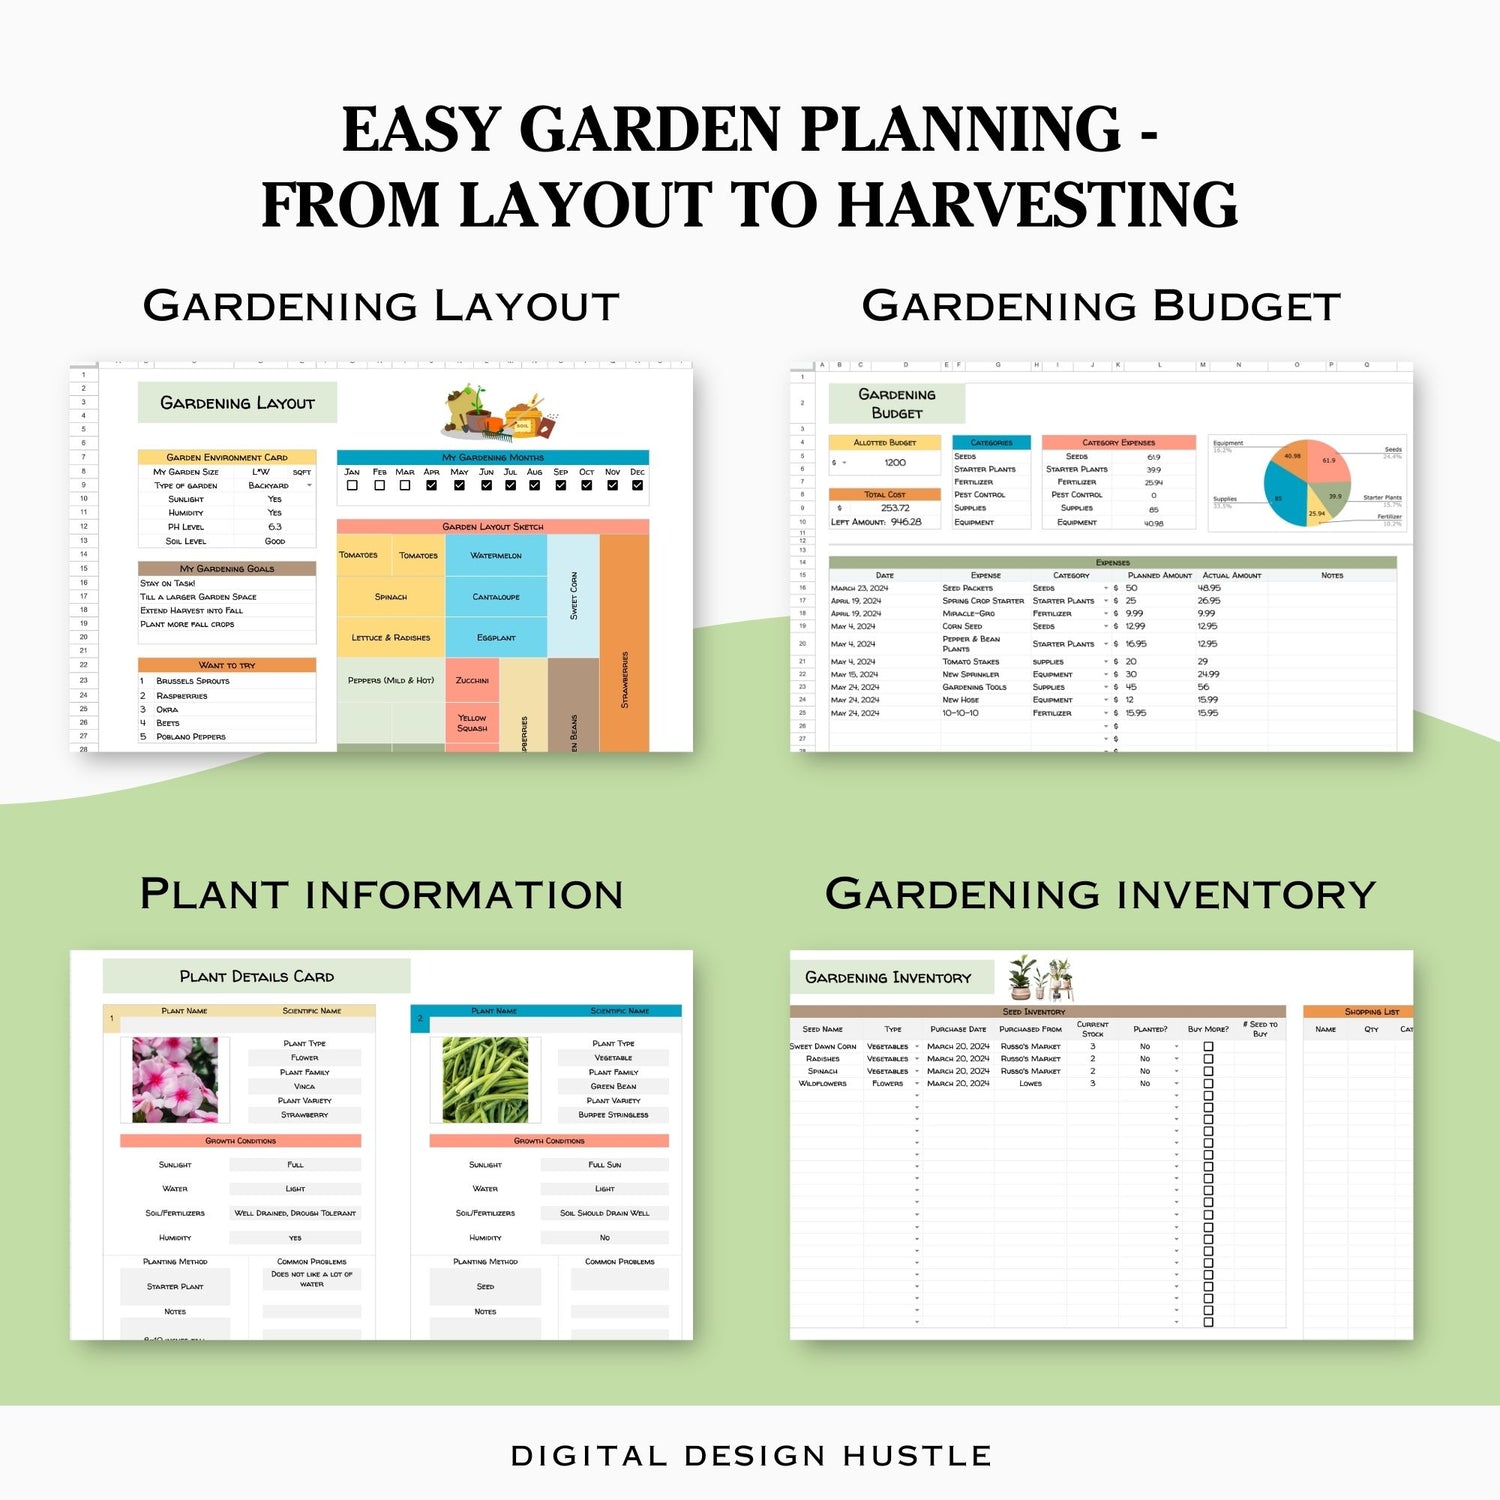 Transform your gardening experience with our comprehensive Gardening Planner for Google Sheets! This spreadsheet is your go-to tool for planning, tracking, and optimizing every stage of your gardening journey. With 12 user-friendly tabs, this planner covers all aspects of gardening from start to finish.